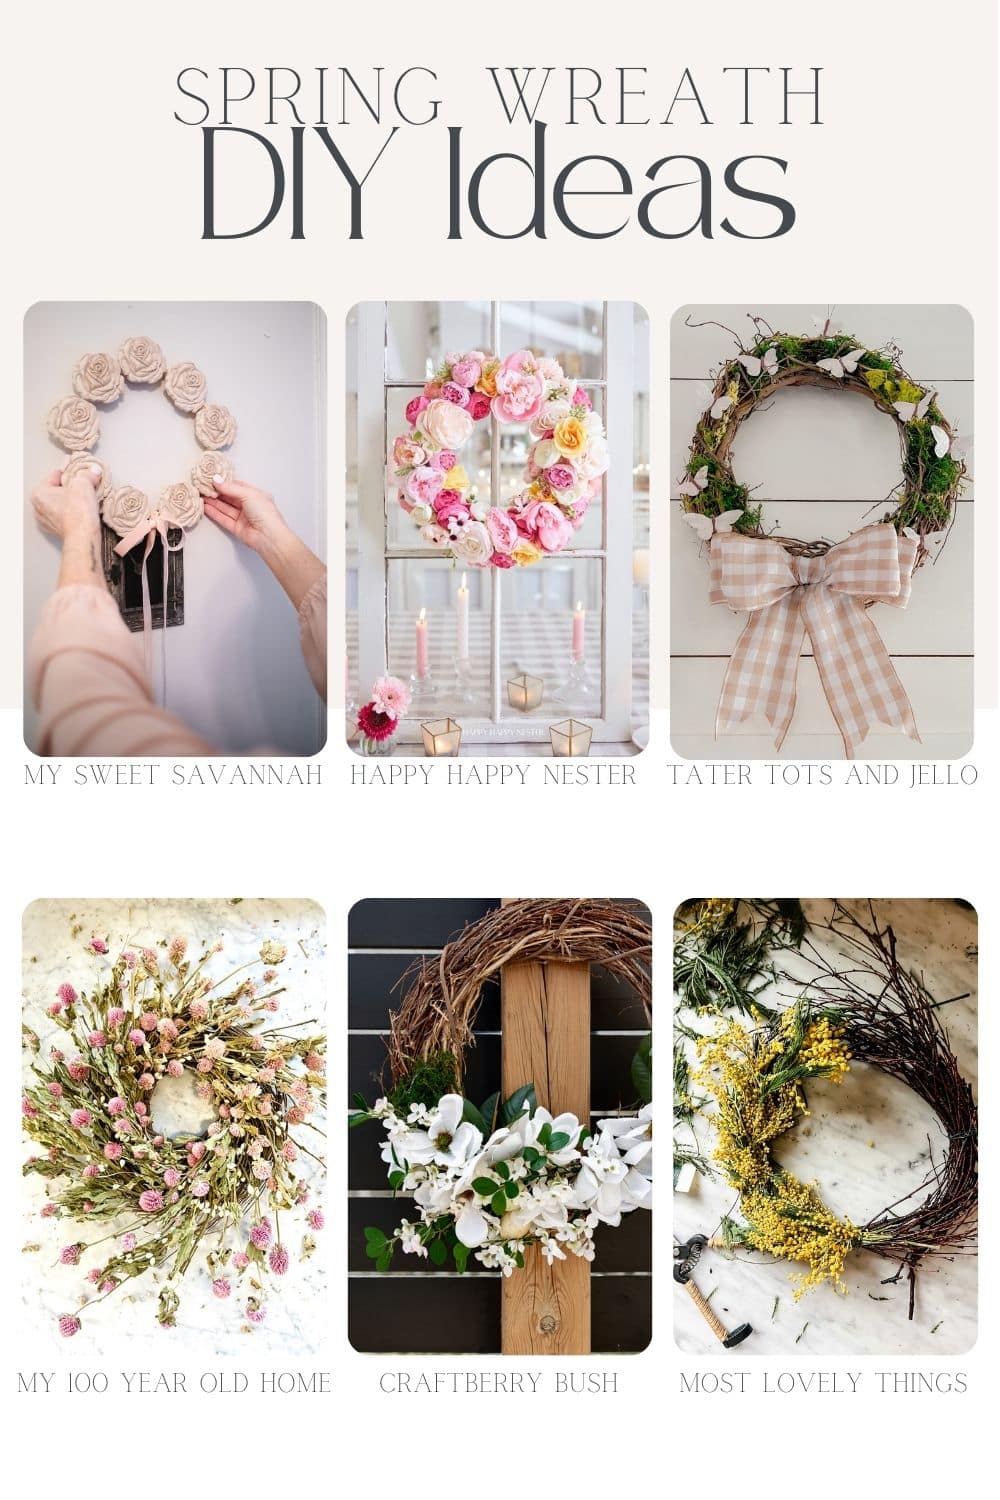 6 fresh and beautiful spring wreaths!